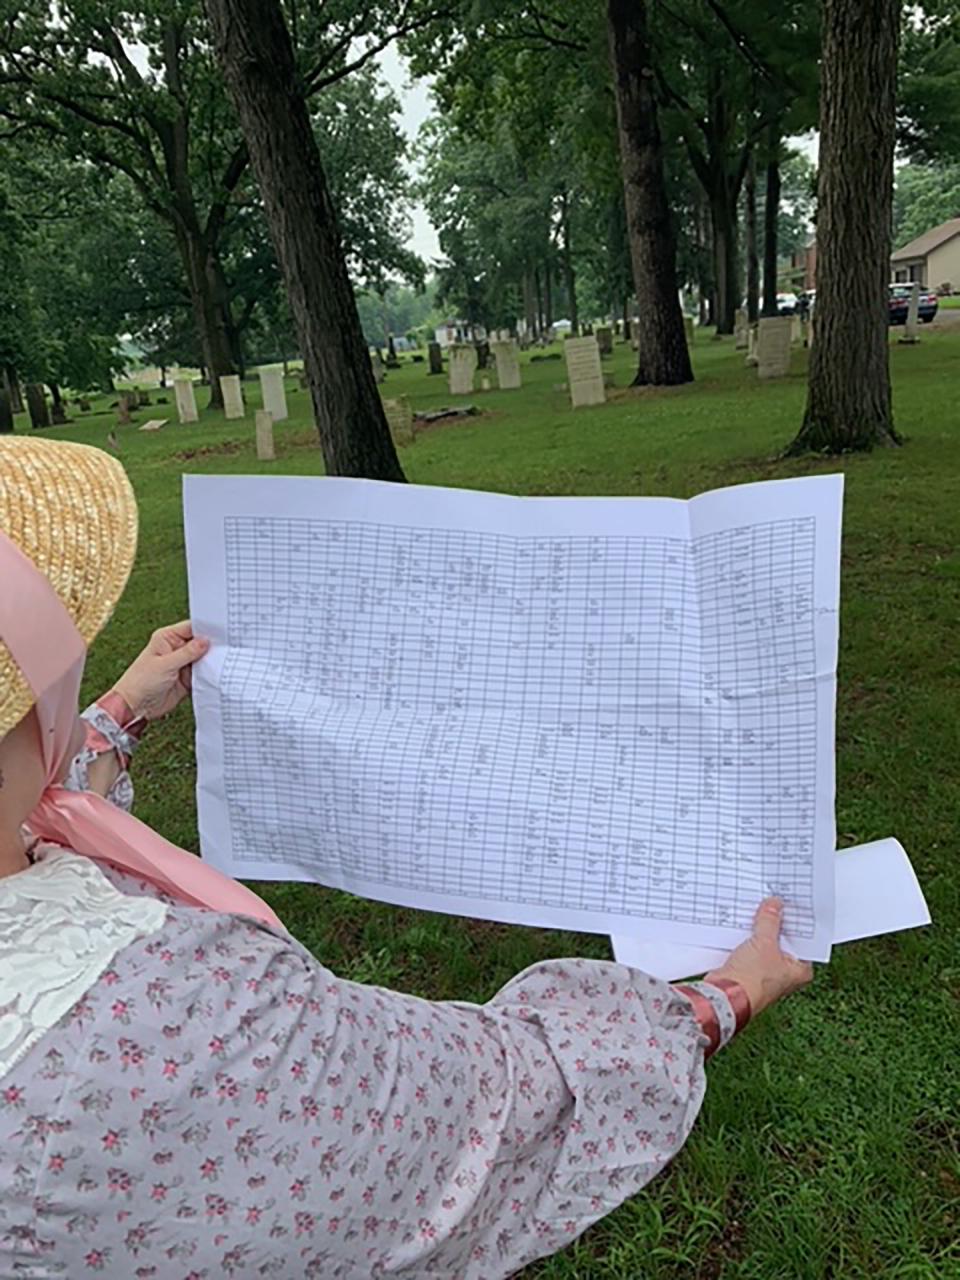 Laura Telsworth and members of Amos Sturgis chapter of the Daughters of the American Revolution are in the midst of a years-long process to clean and repair headstones at Old Centreville Cemetery. They have taken inventory of all 1,500 graves, of which 399 of the deceased have been identified.